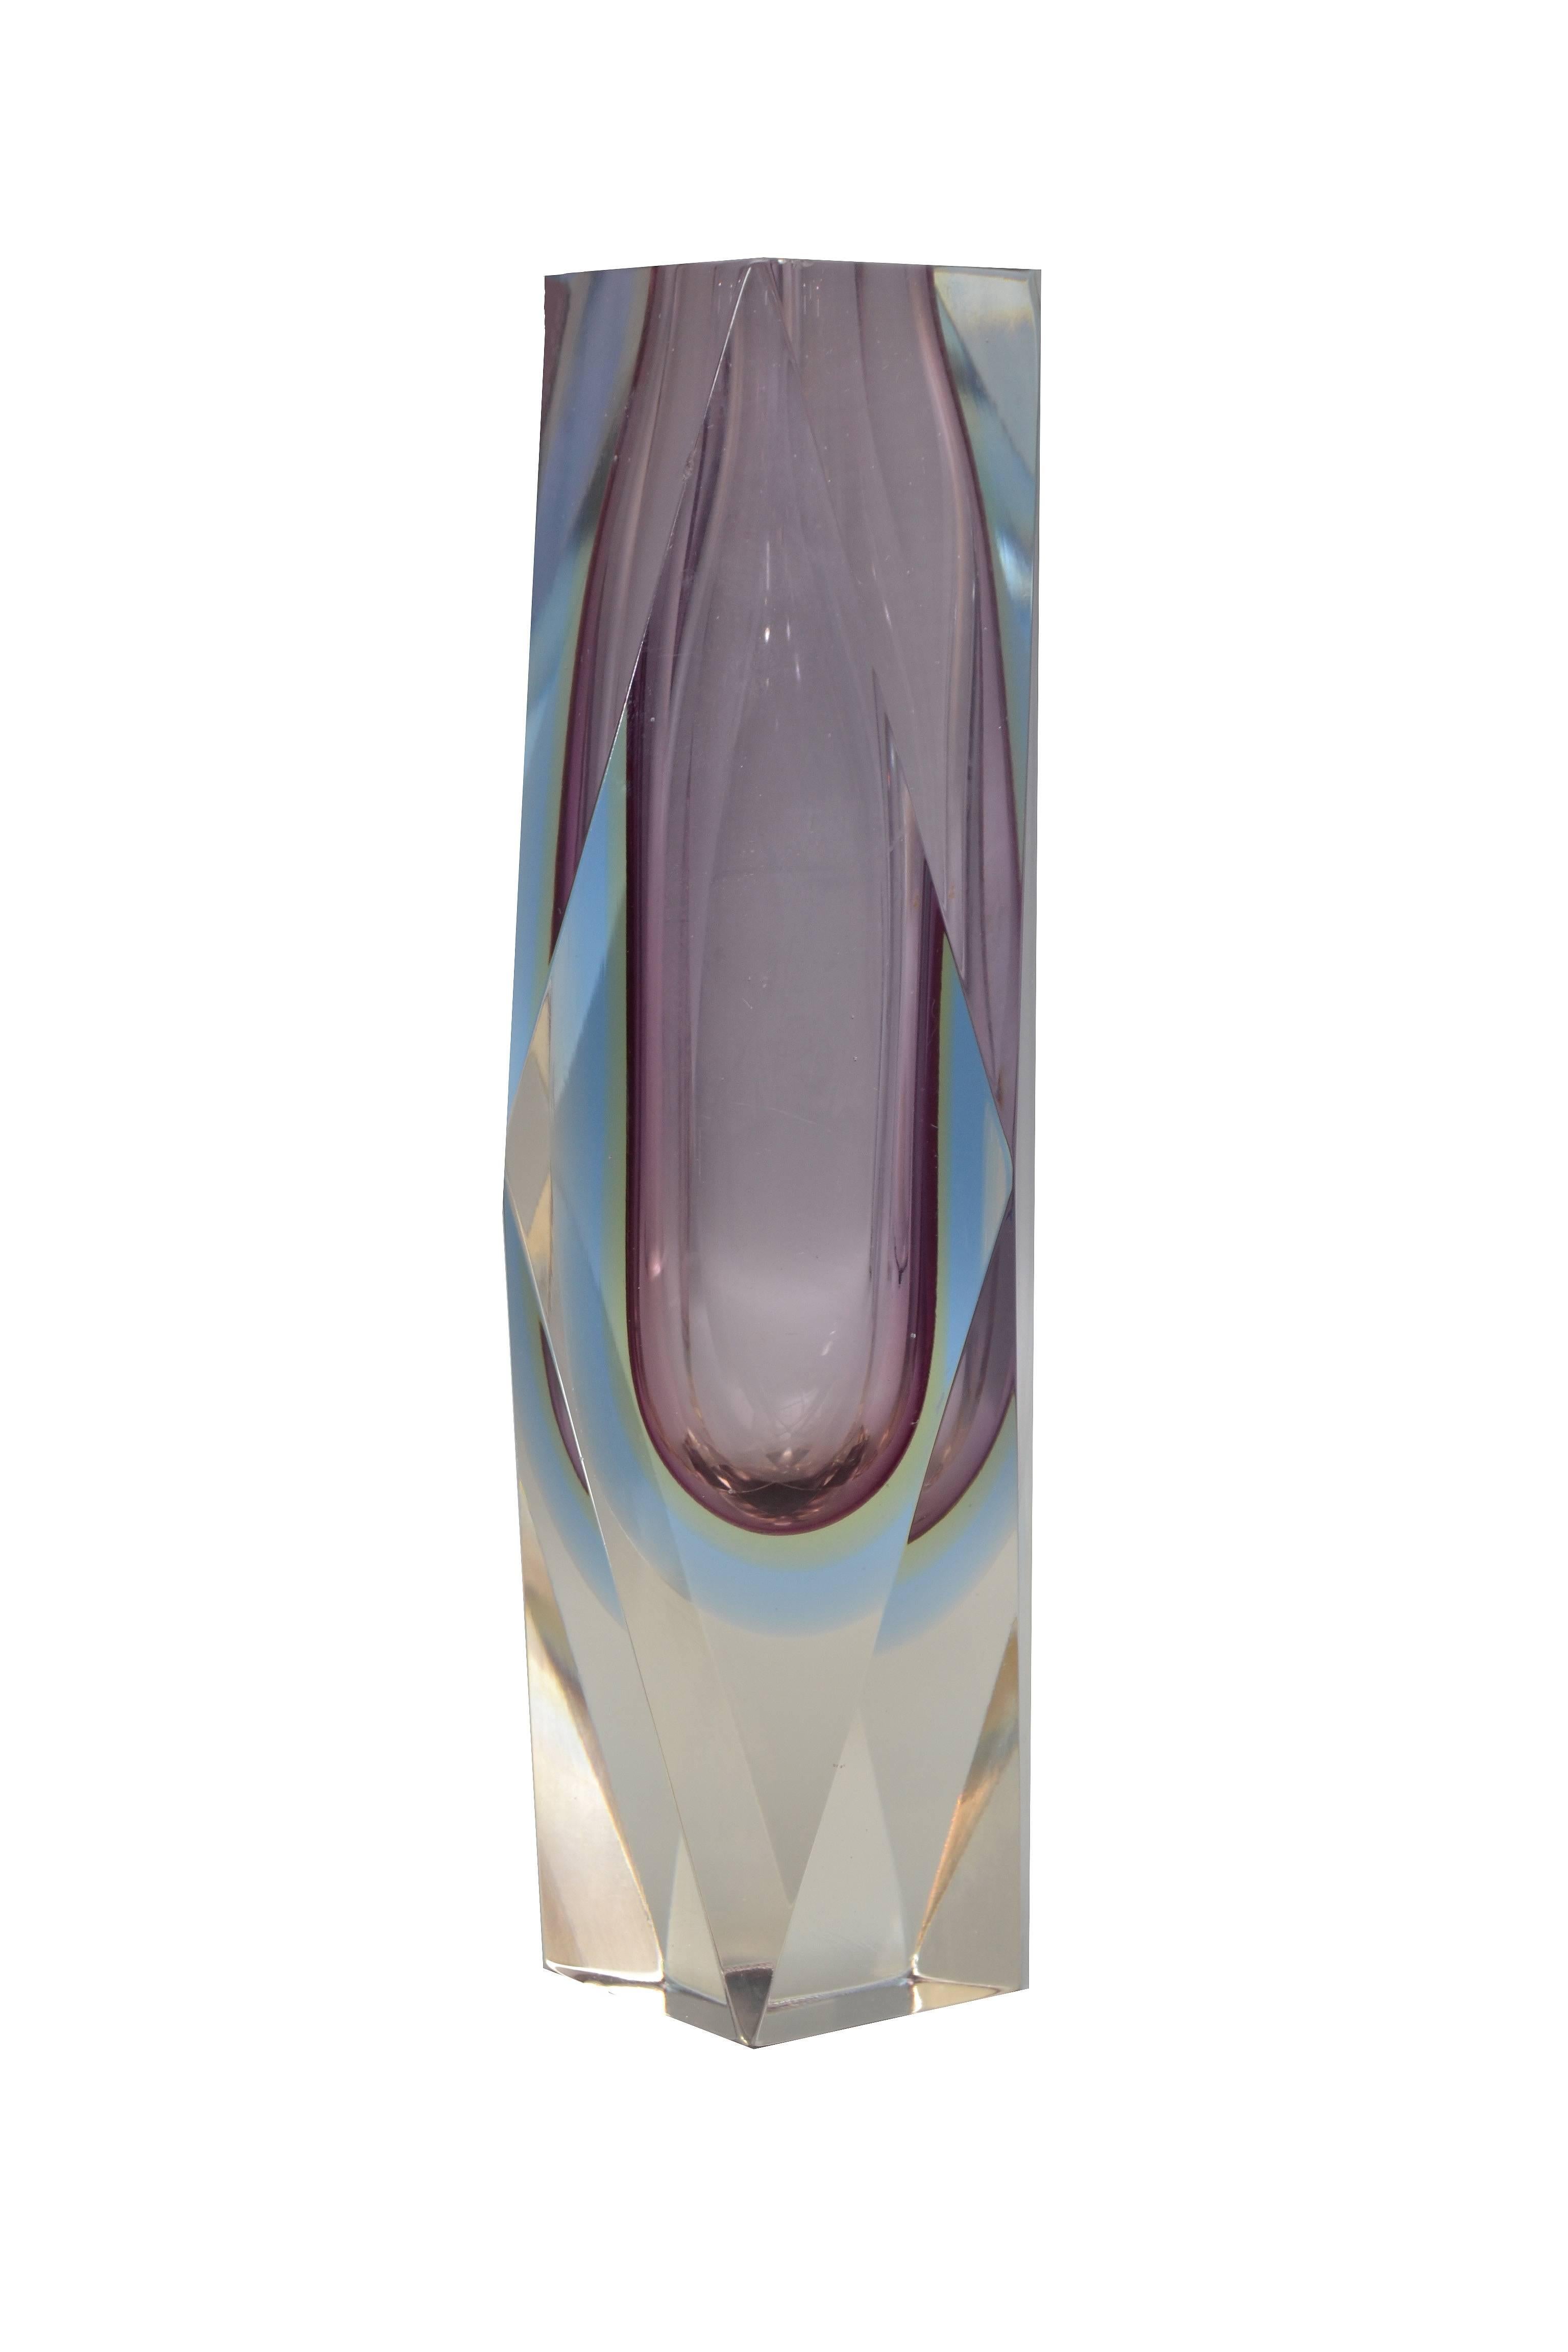 Faceted Vase in Violet Attributed to Mandruzzato 1